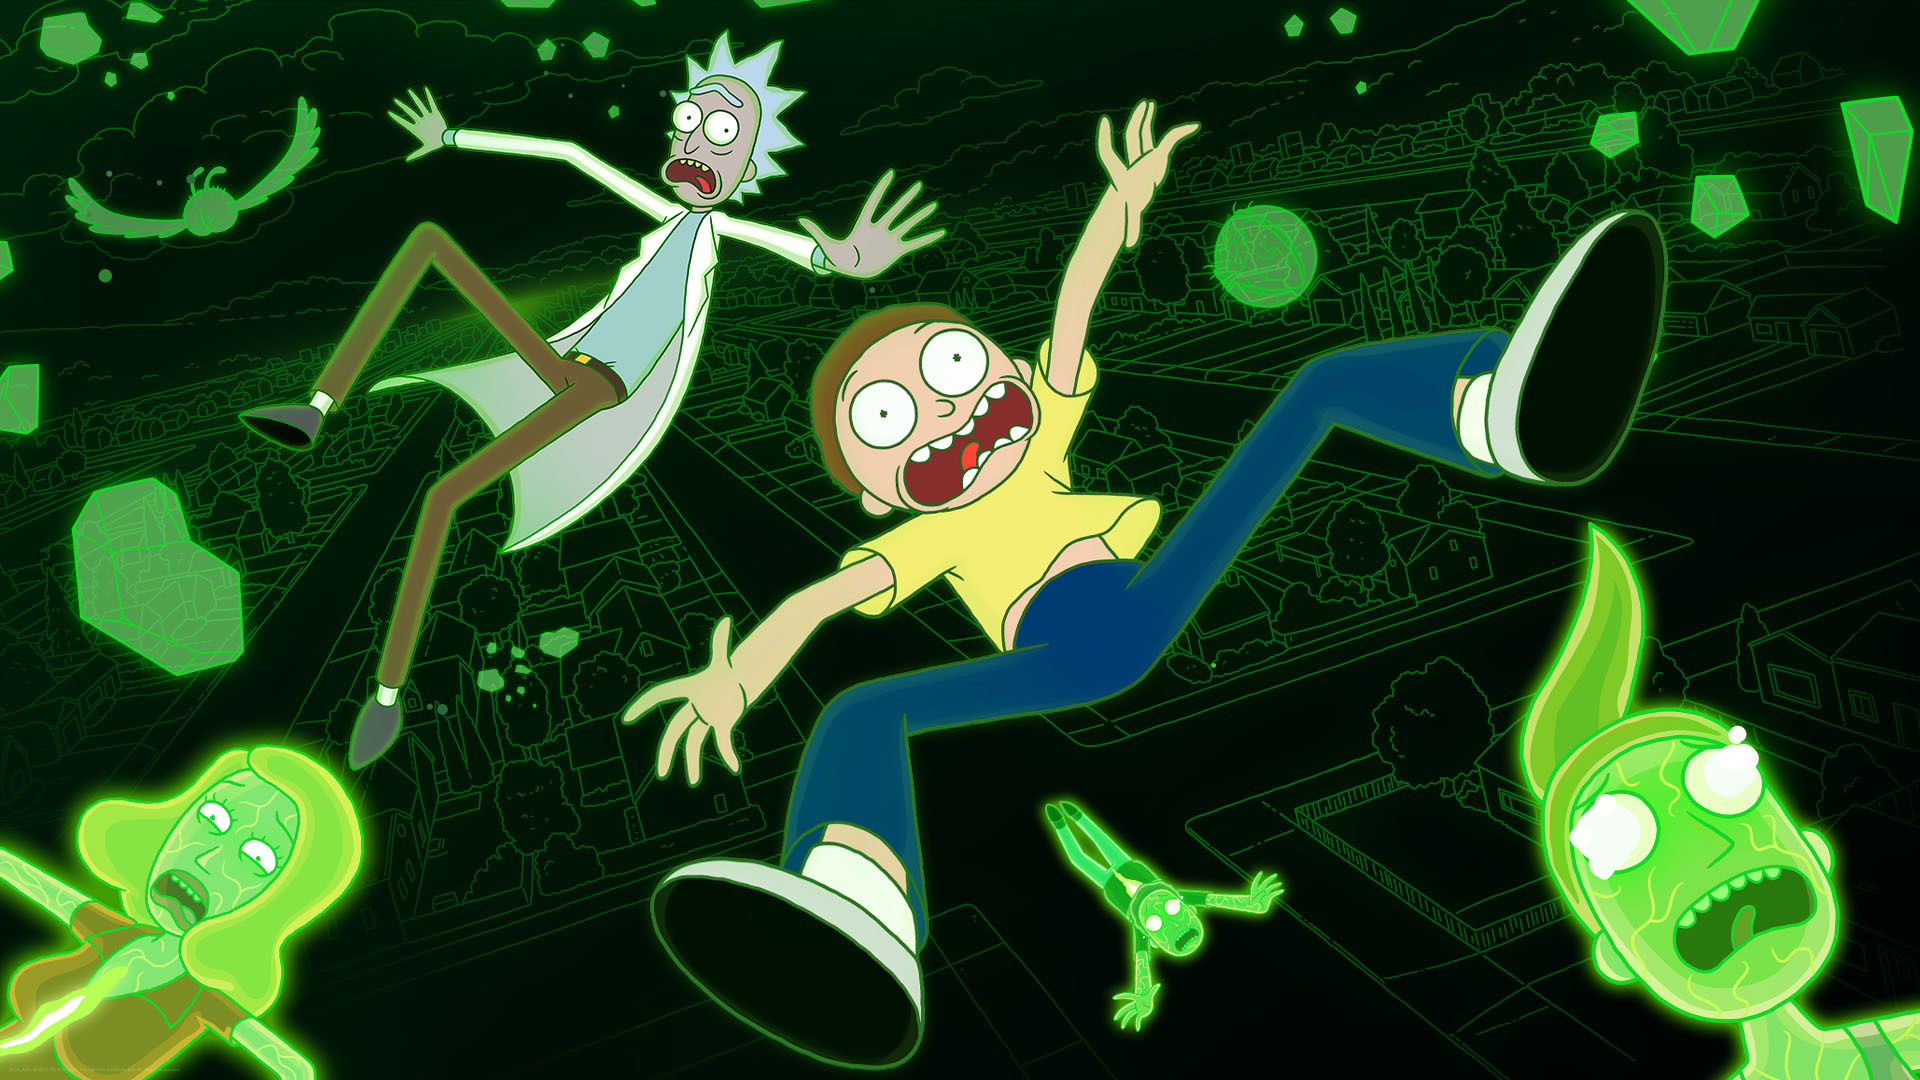 Rick and Morty Premiere #1 Most-Viewed Cable Program With Young Viewers